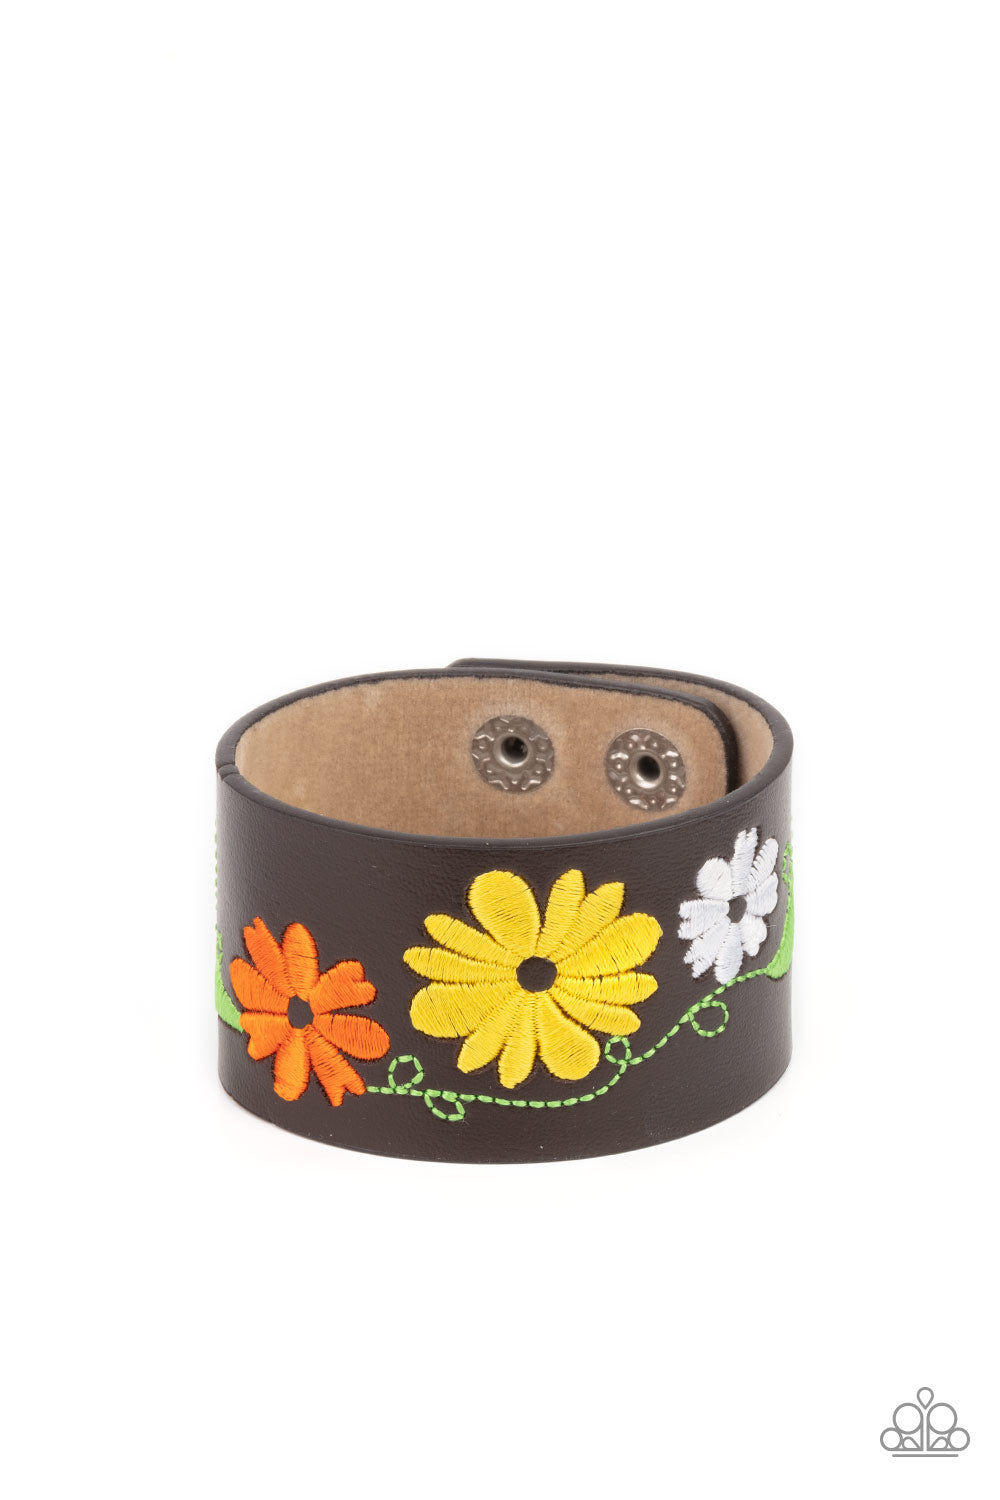 Western Eden Yellow Wrap Bracelet - Paparazzi Accessories  A colorful floral pattern is embroidered across the front of a black leather band, creating a whimsical centerpiece around the wrist. Features an adjustable snap closure.  All Paparazzi Accessories are lead free and nickel free!  Sold as one individual bracelet.